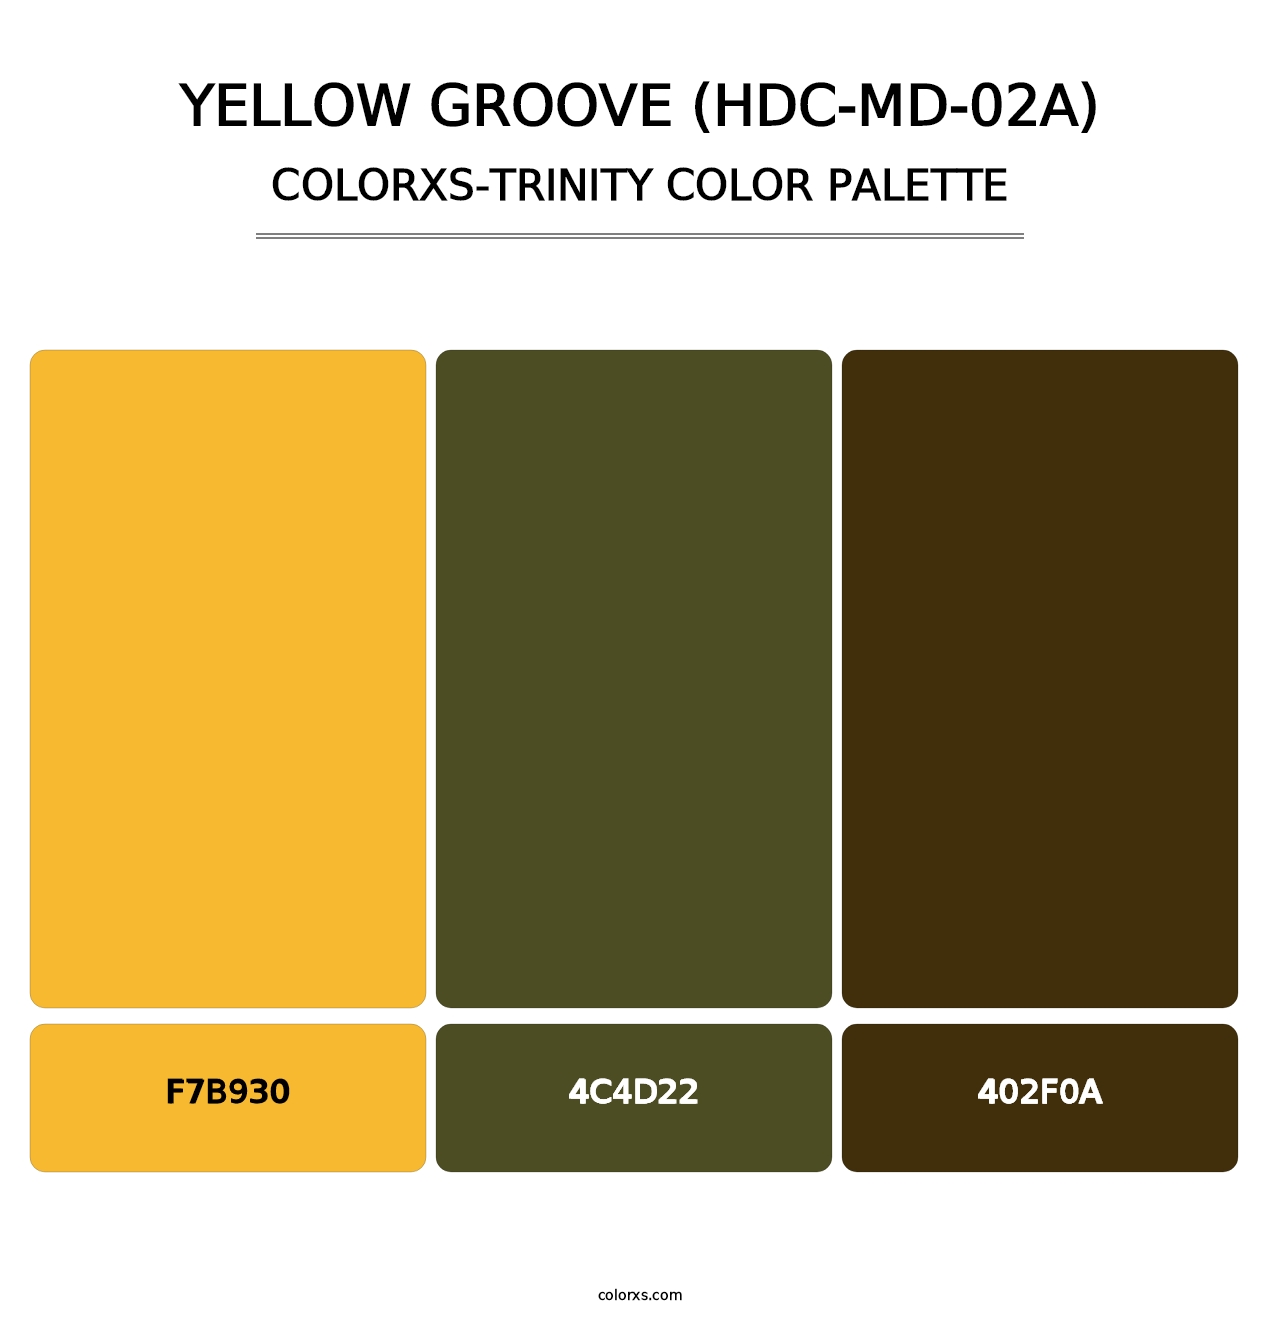 Yellow Groove (HDC-MD-02A) - Colorxs Trinity Palette